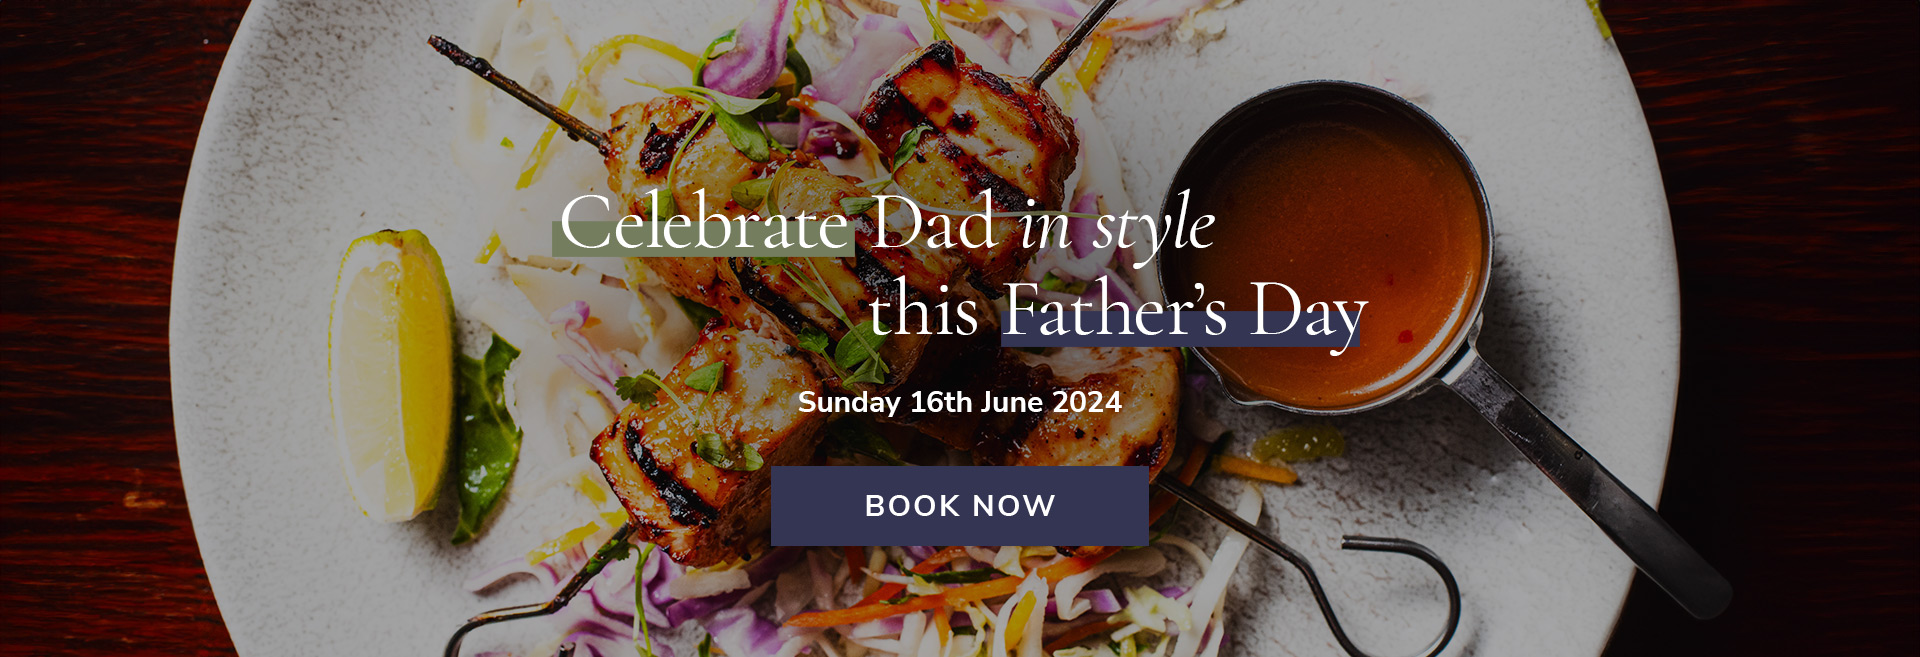 Father's Day at The Spaniards Inn